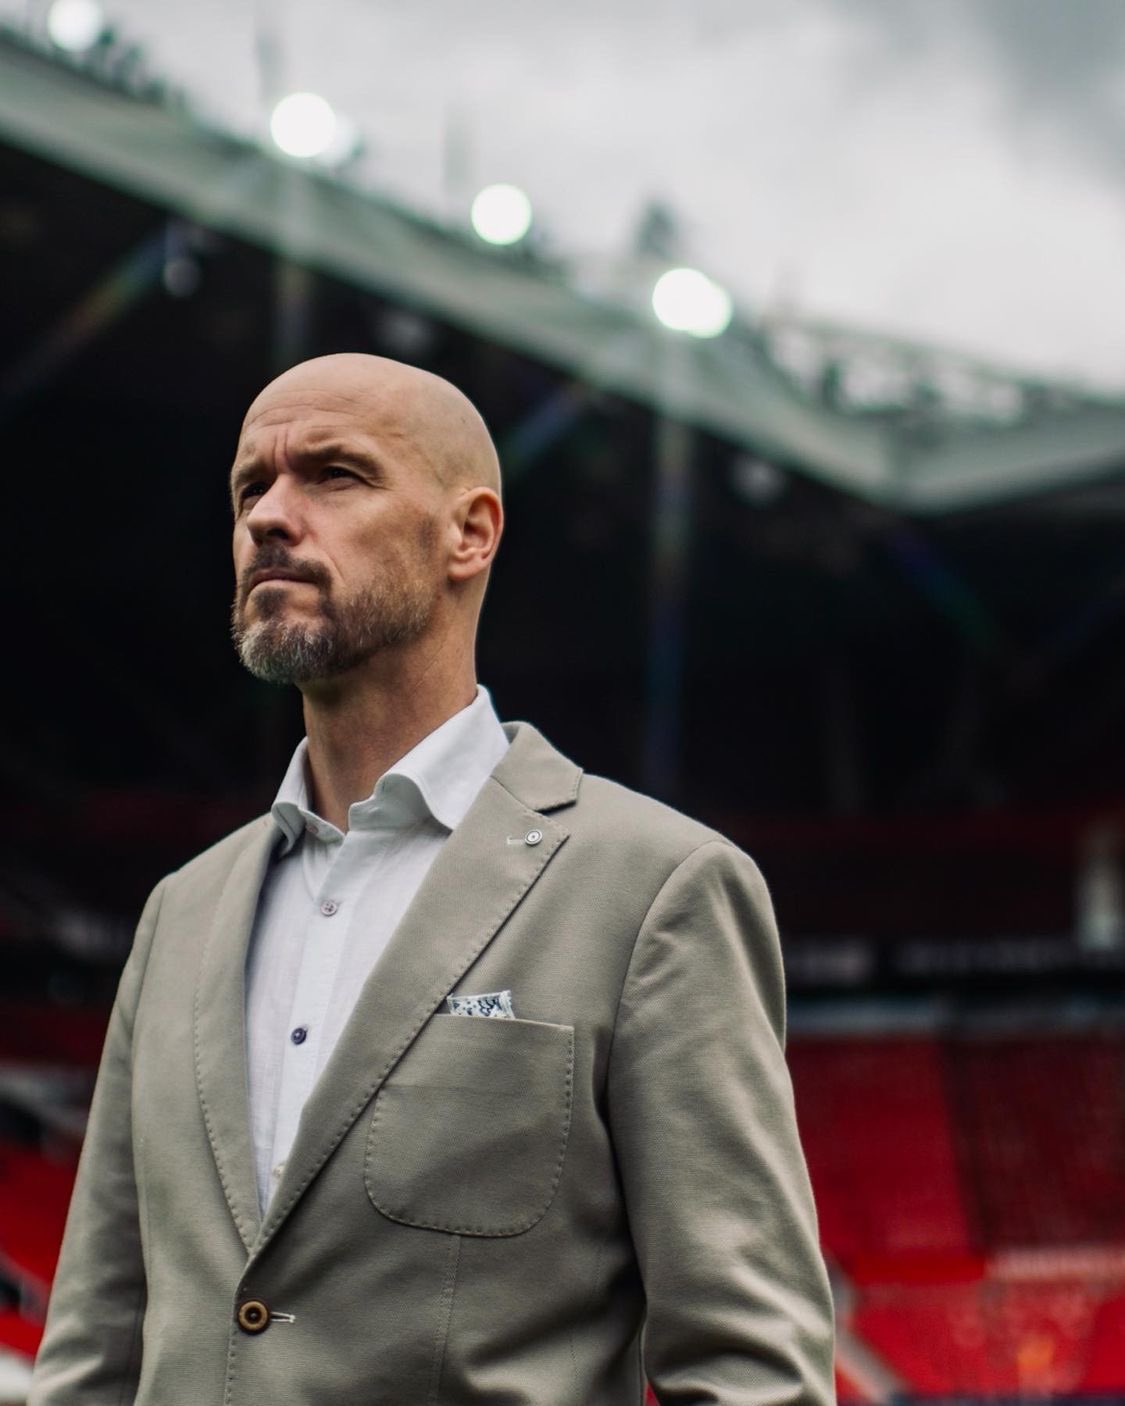 Erik ten Hag First Press Conference: New Manchester United manager Erik ten Hag speaks about Cristiano Ronaldo, Preseason, Captaincy and more - Check out